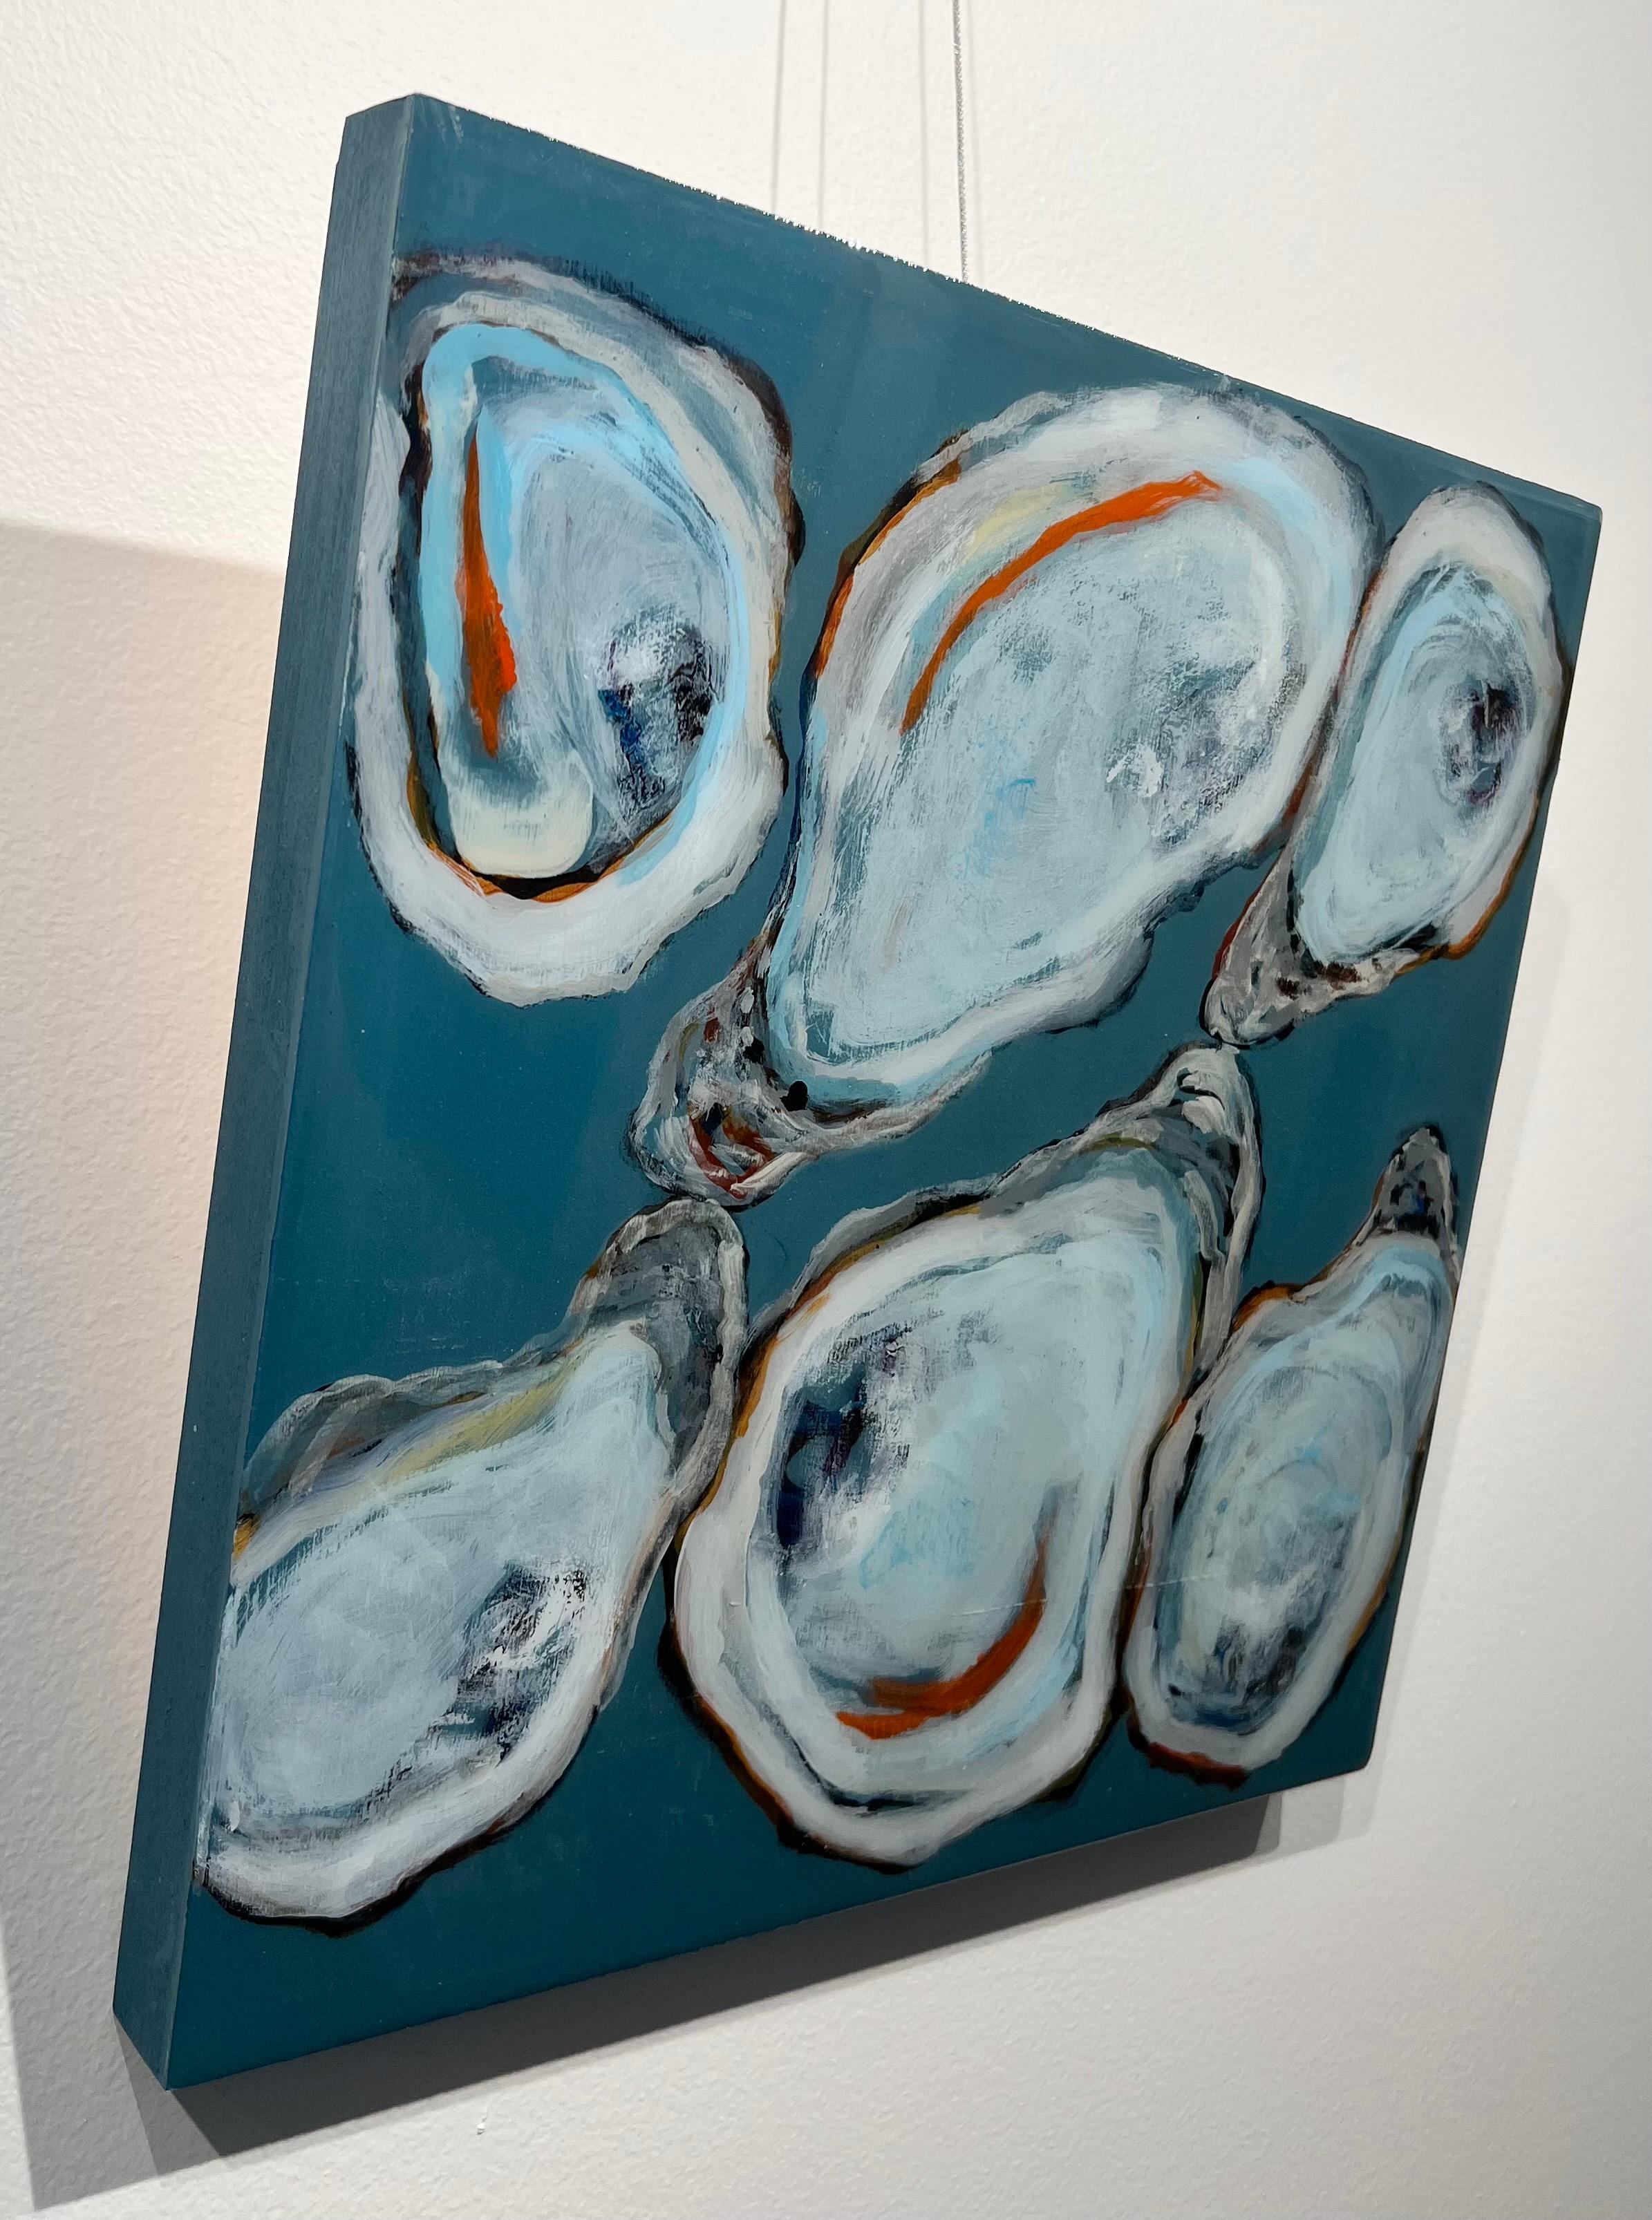 
About the Artist
“Spending a lifetime of summers on Martha's Vineyard my work has evolved into natural forms of coastal scenes. My connection to the island developed a deep concern with natural forms life-plants, shells, hills, trees, stones and